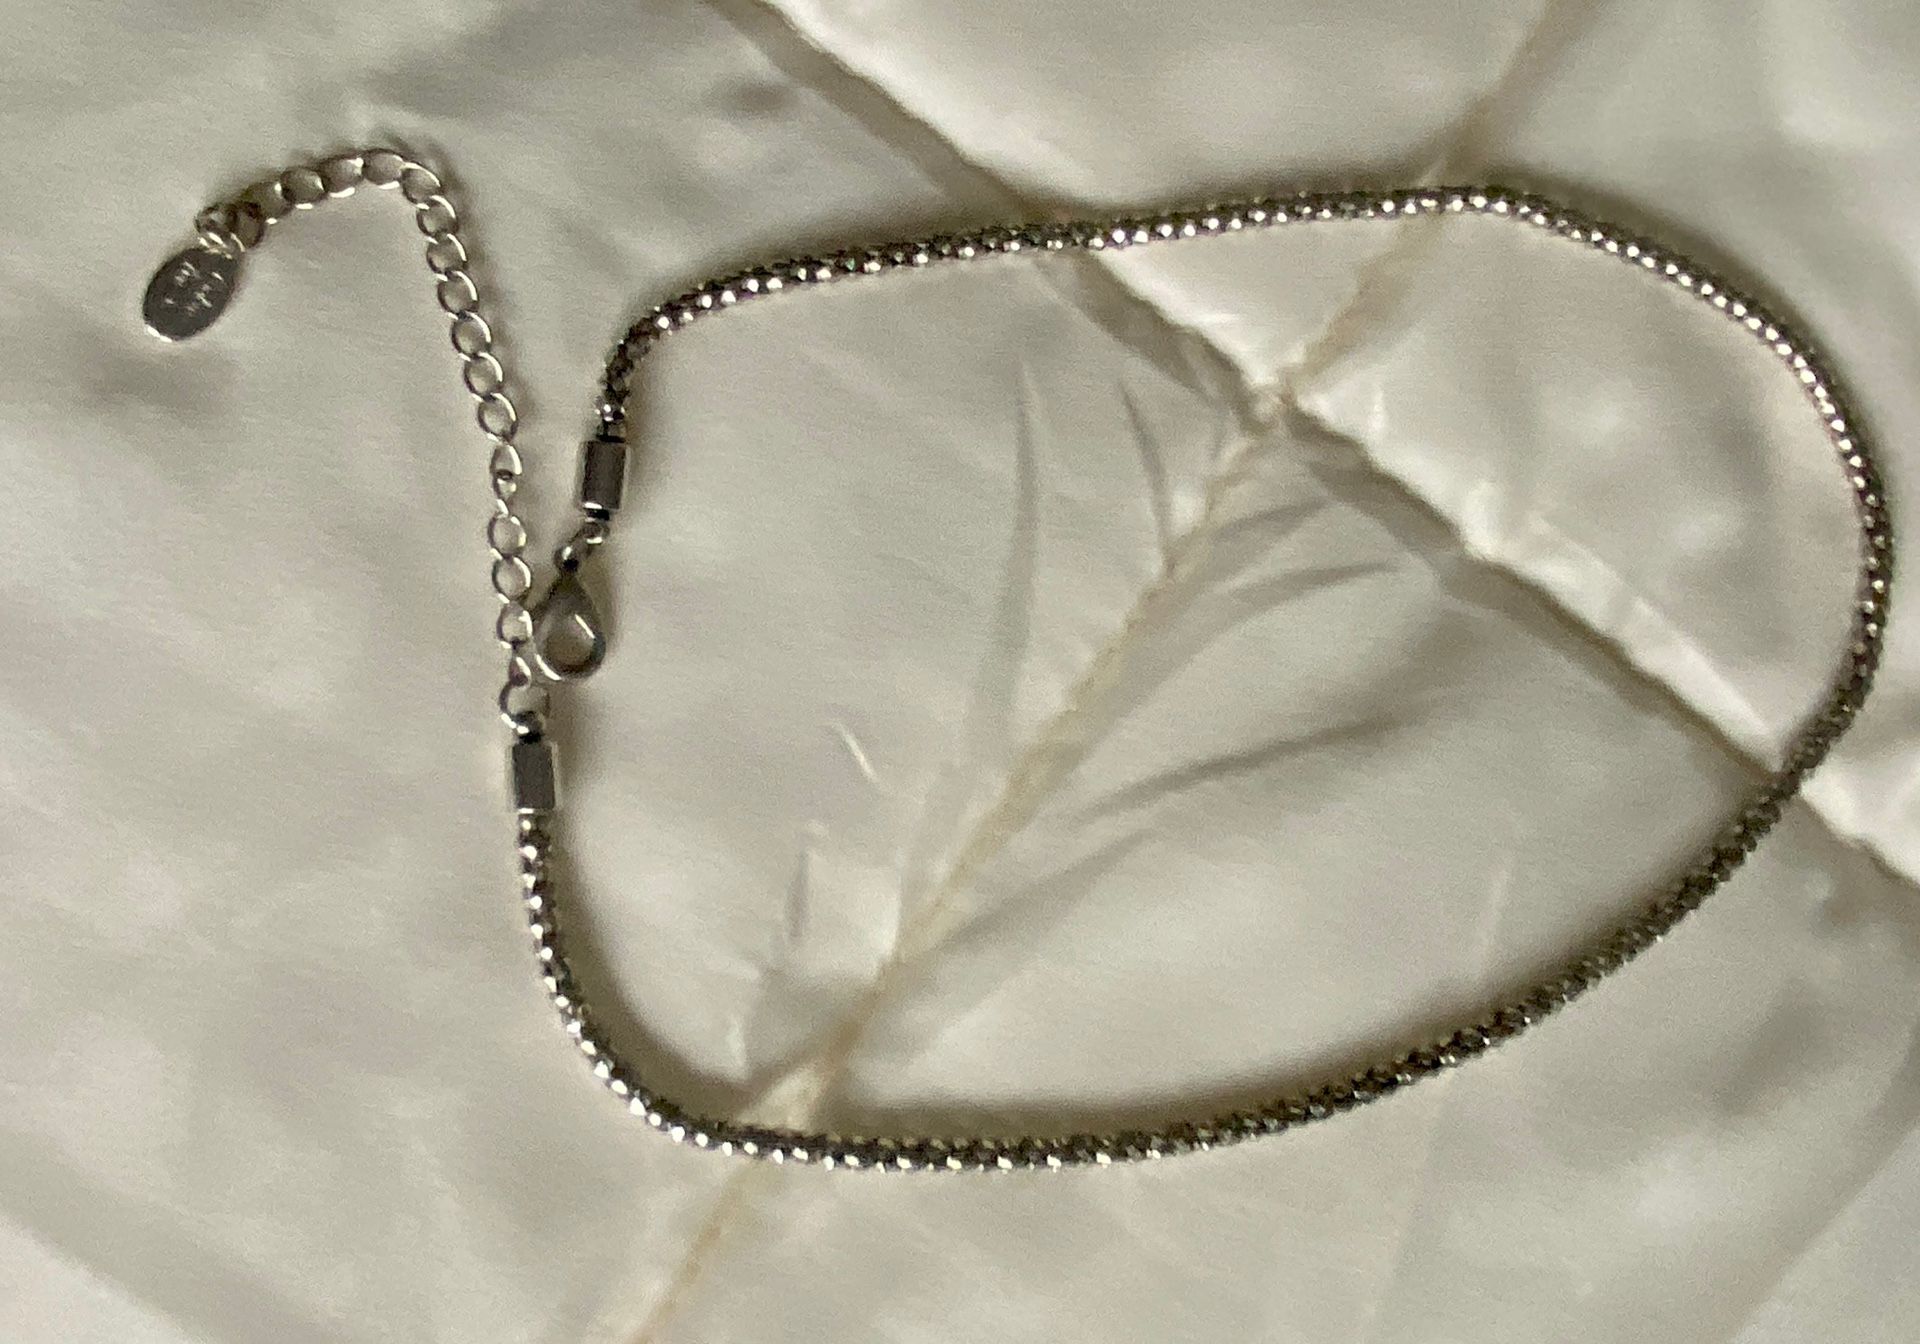   Cookie Lee  Silver Necklace